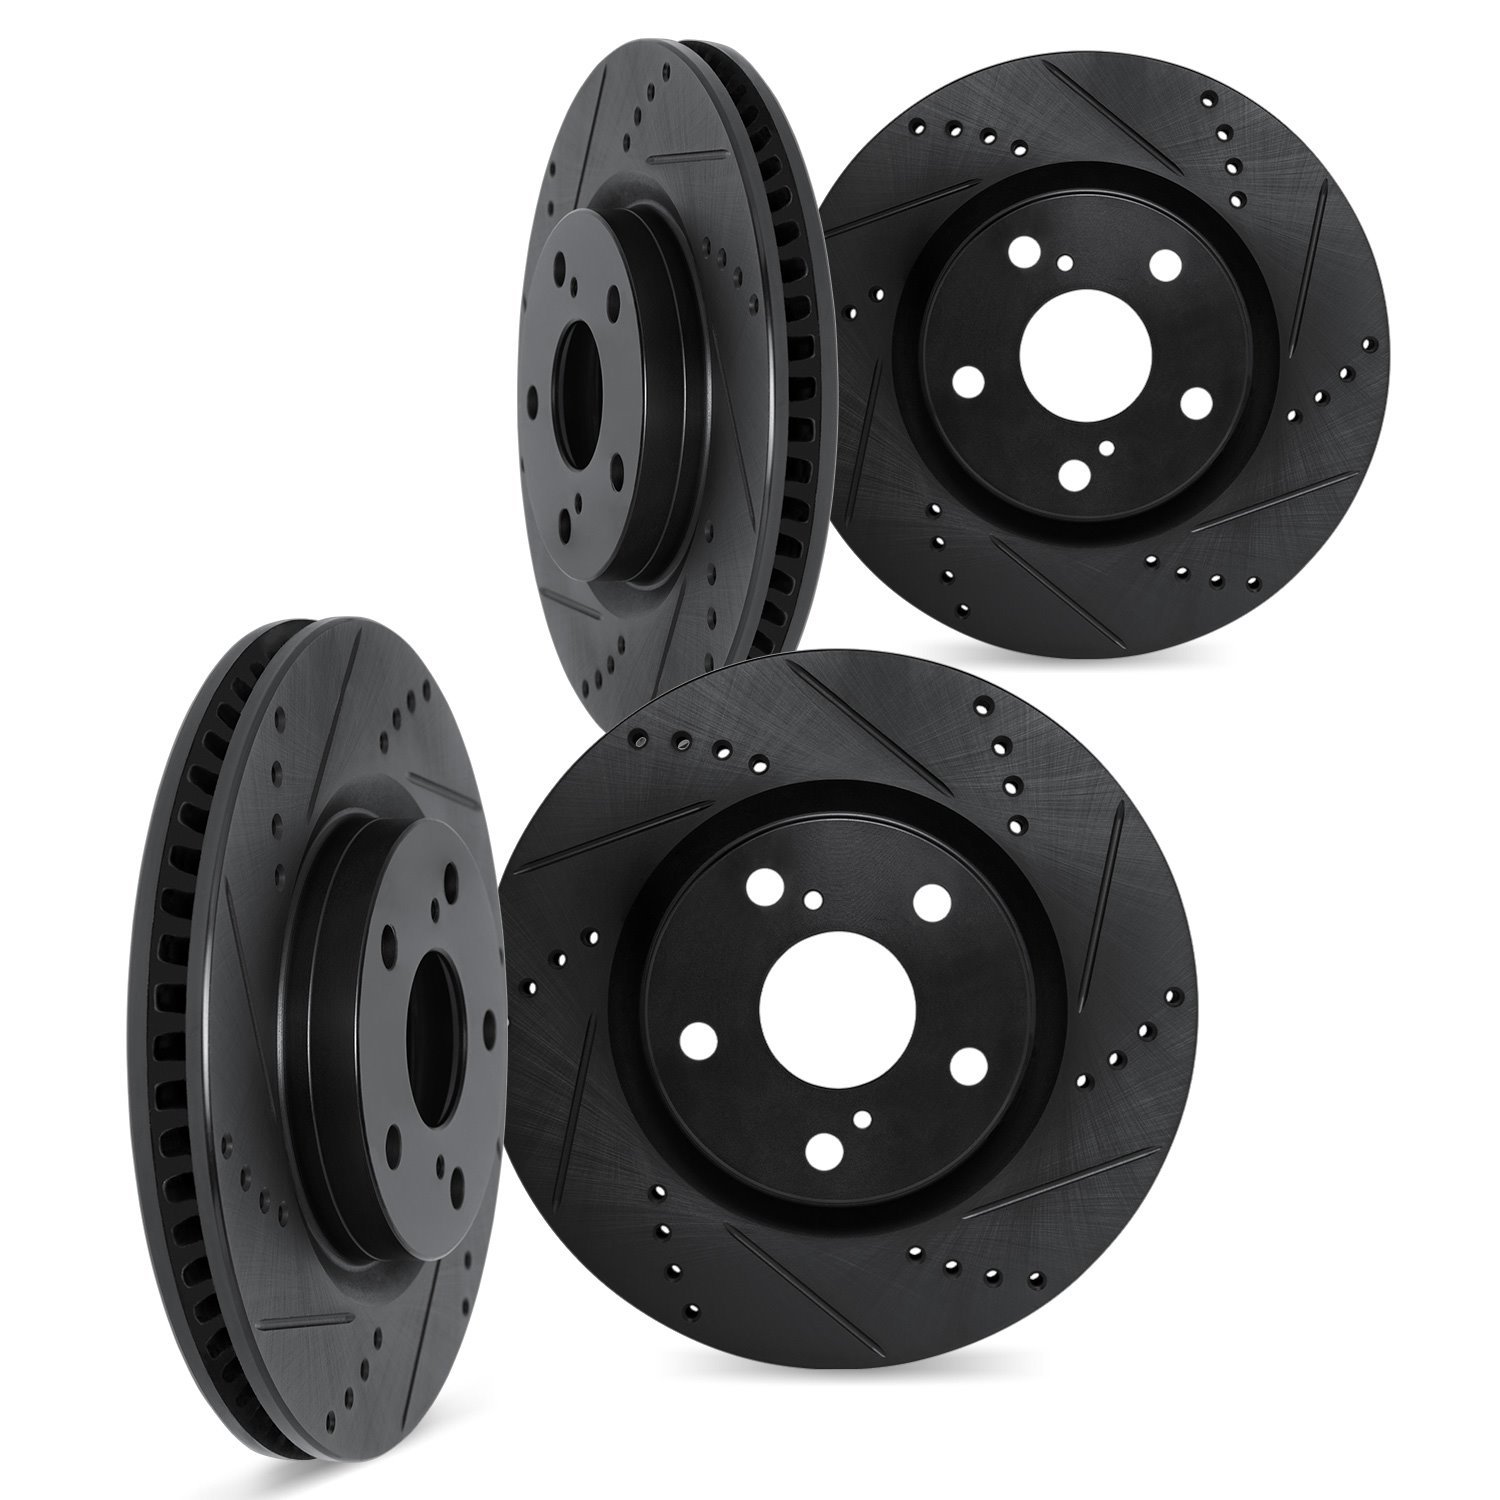 8004-73059 Drilled/Slotted Brake Rotors [Black], 1990-1997 Audi/Volkswagen, Position: Front and Rear